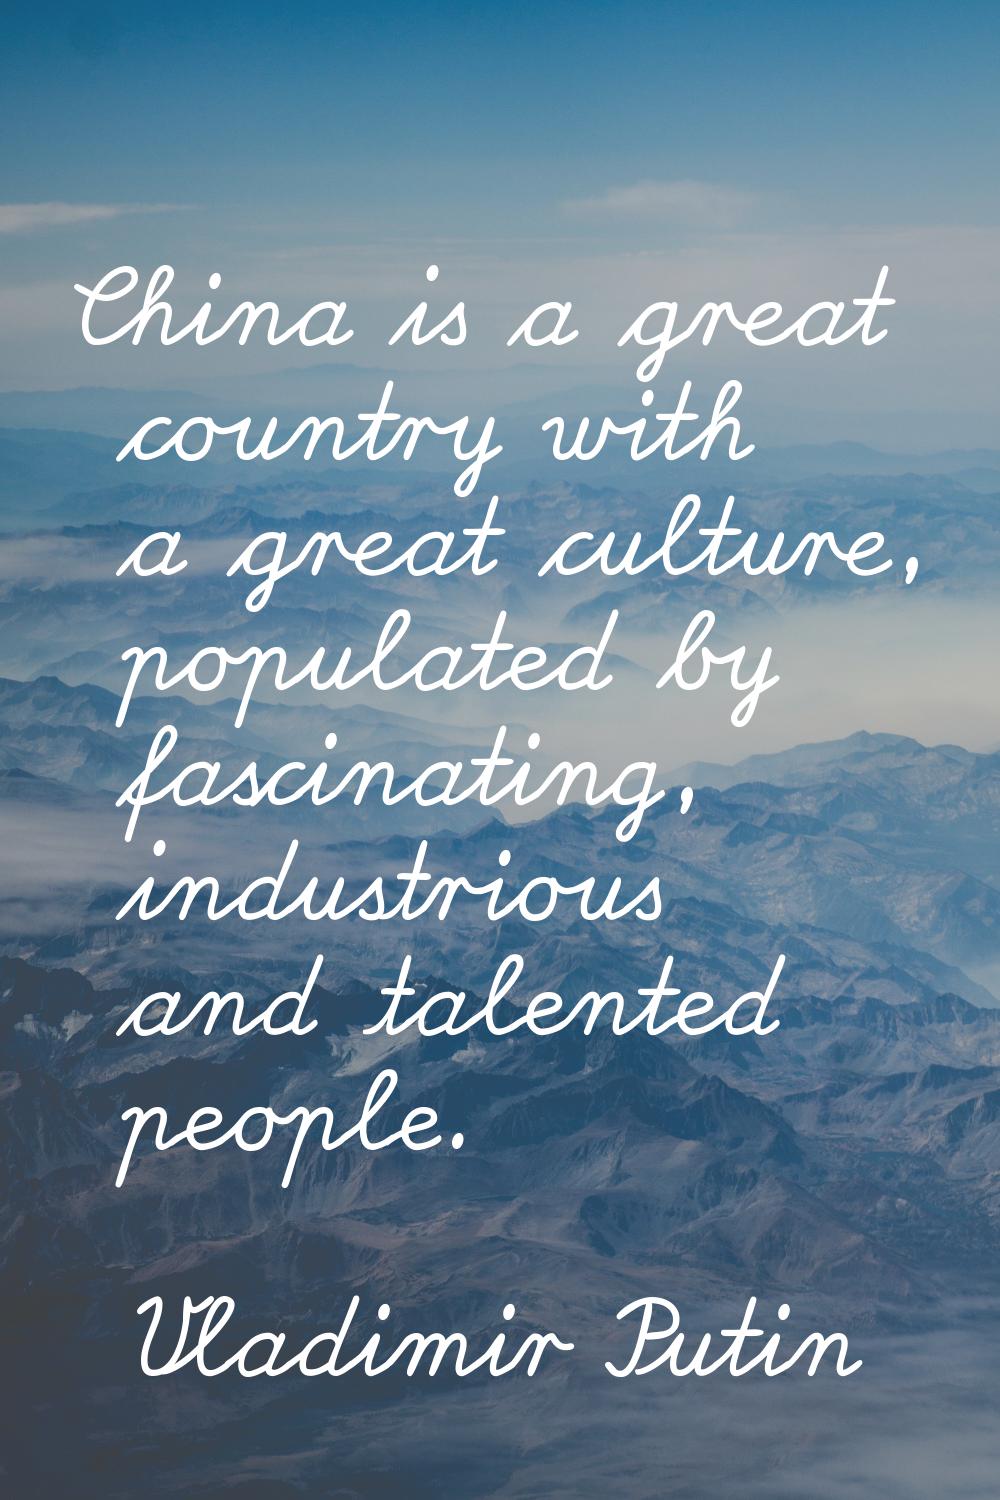 China is a great country with a great culture, populated by fascinating, industrious and talented p